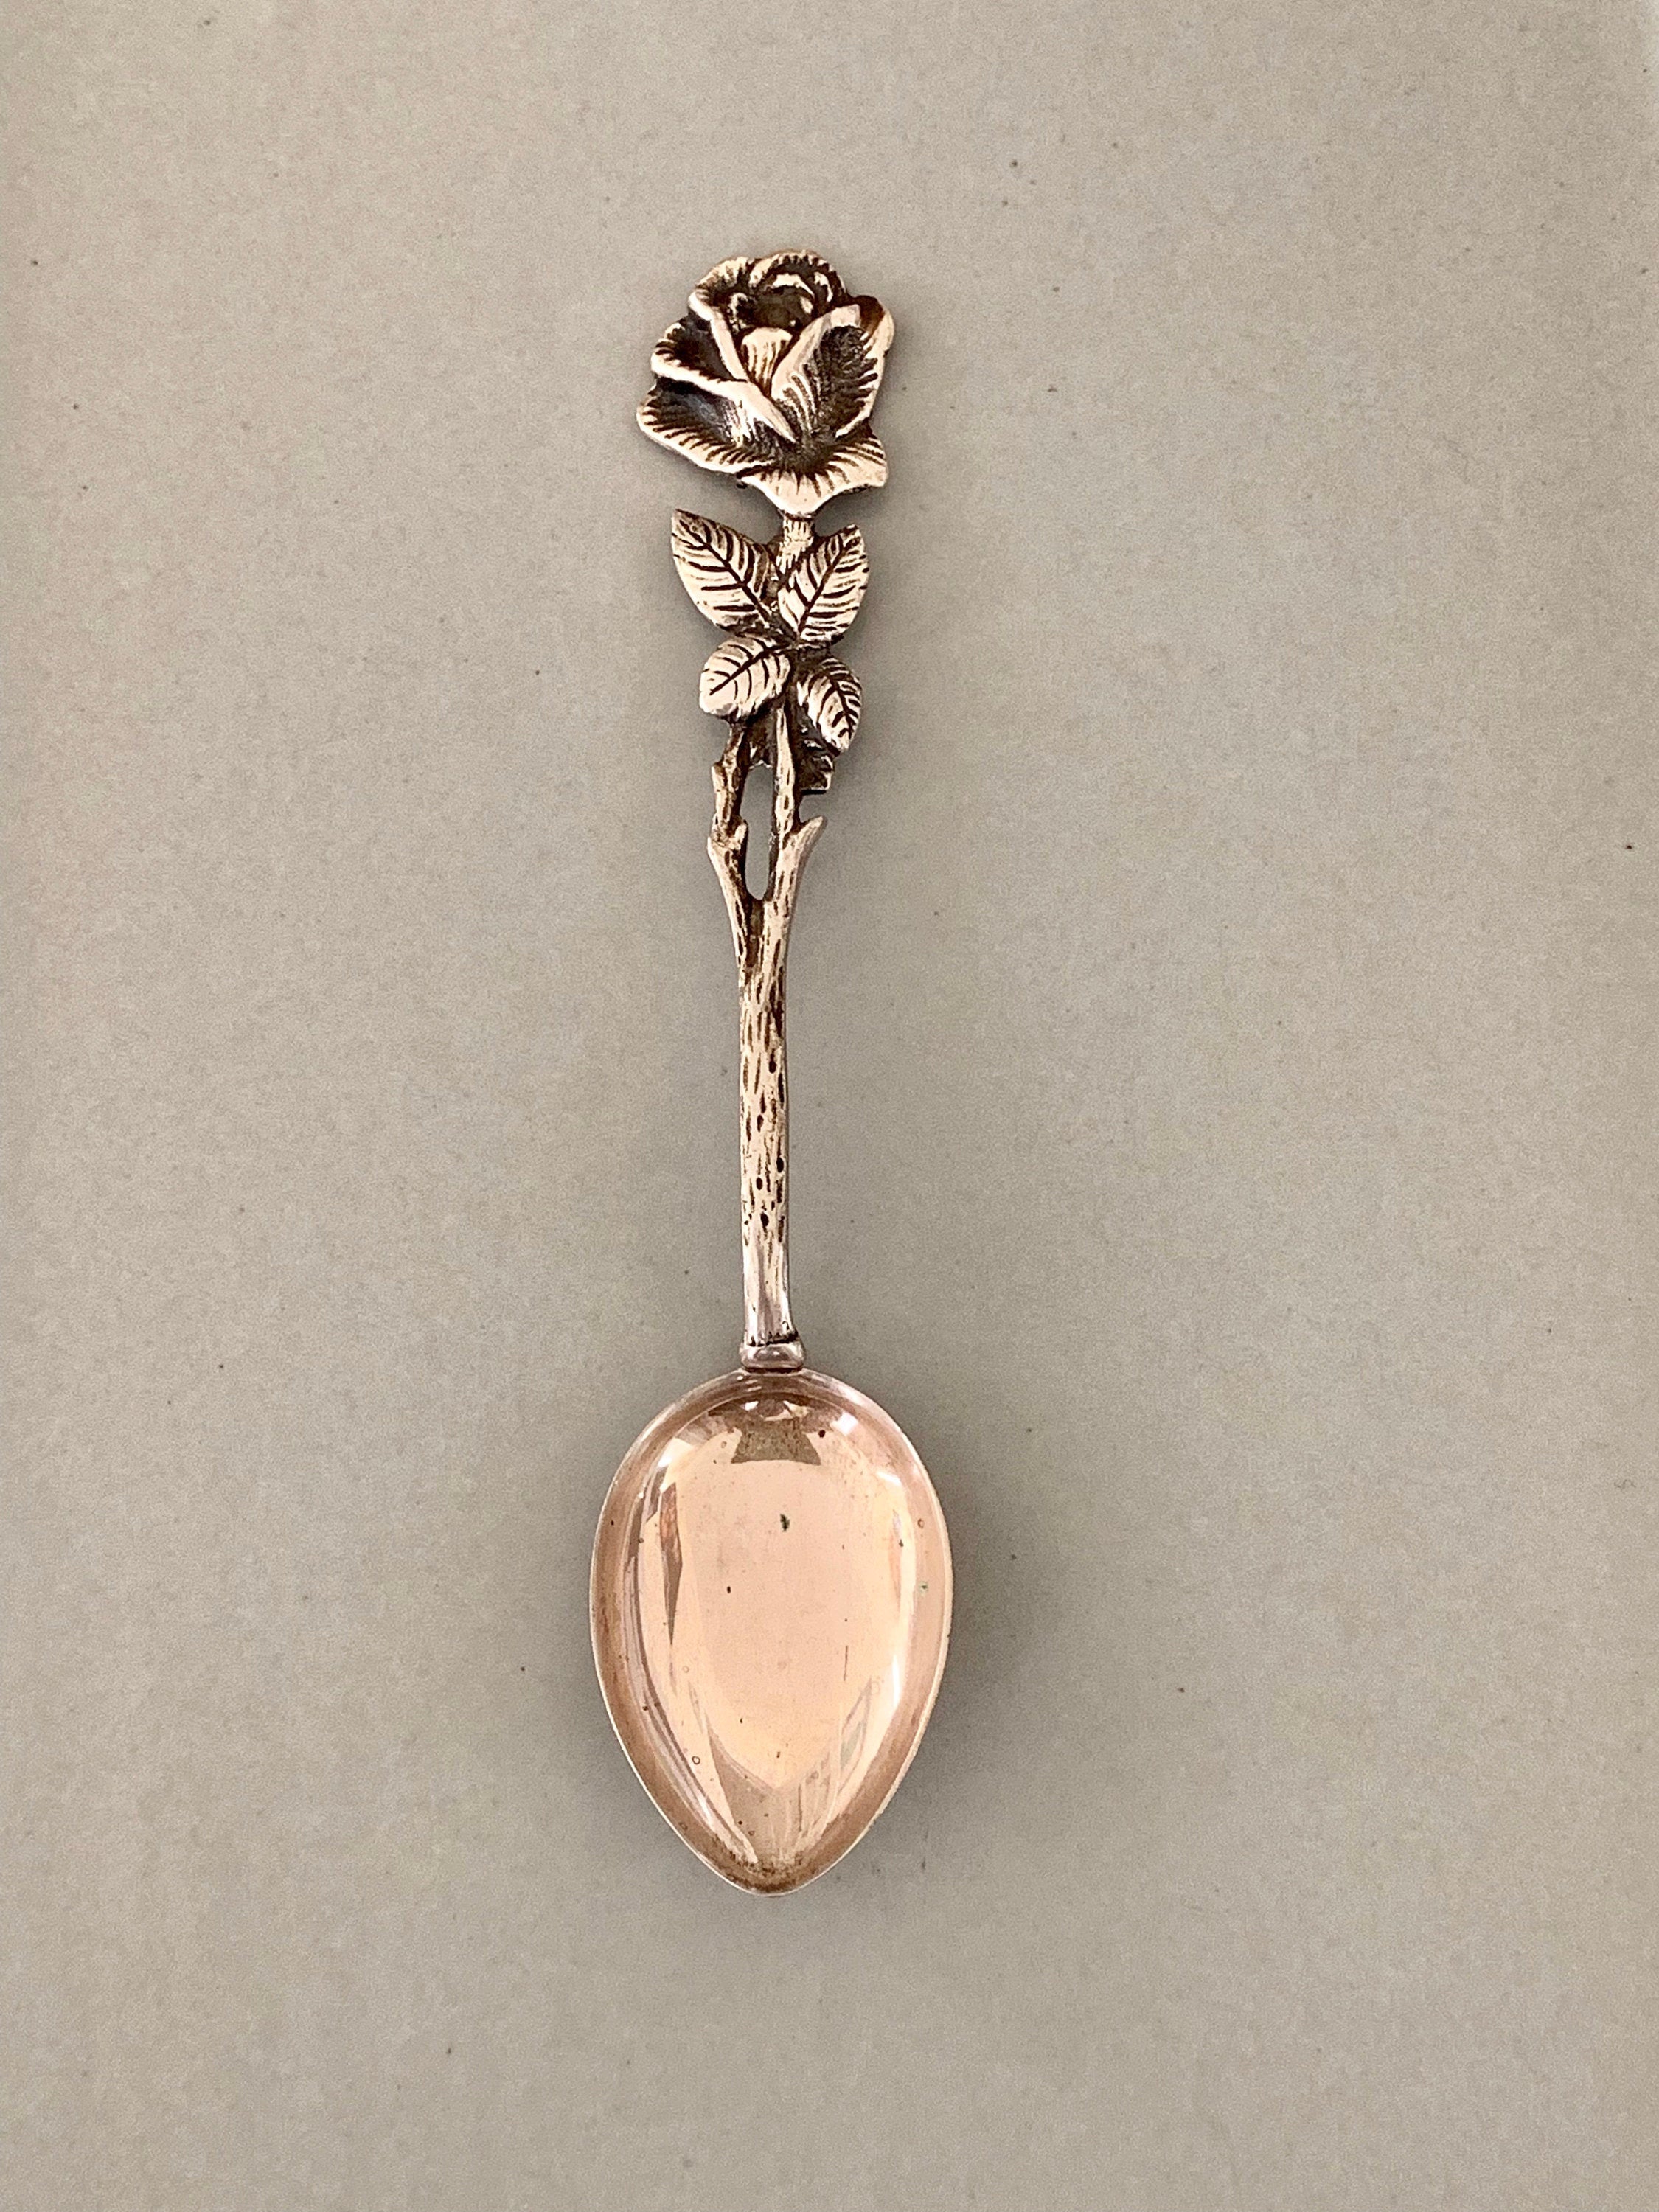 Watrous MFG Co. Sterling Silver Antique "Rose" Spoon Vintage Flatware, Collectible